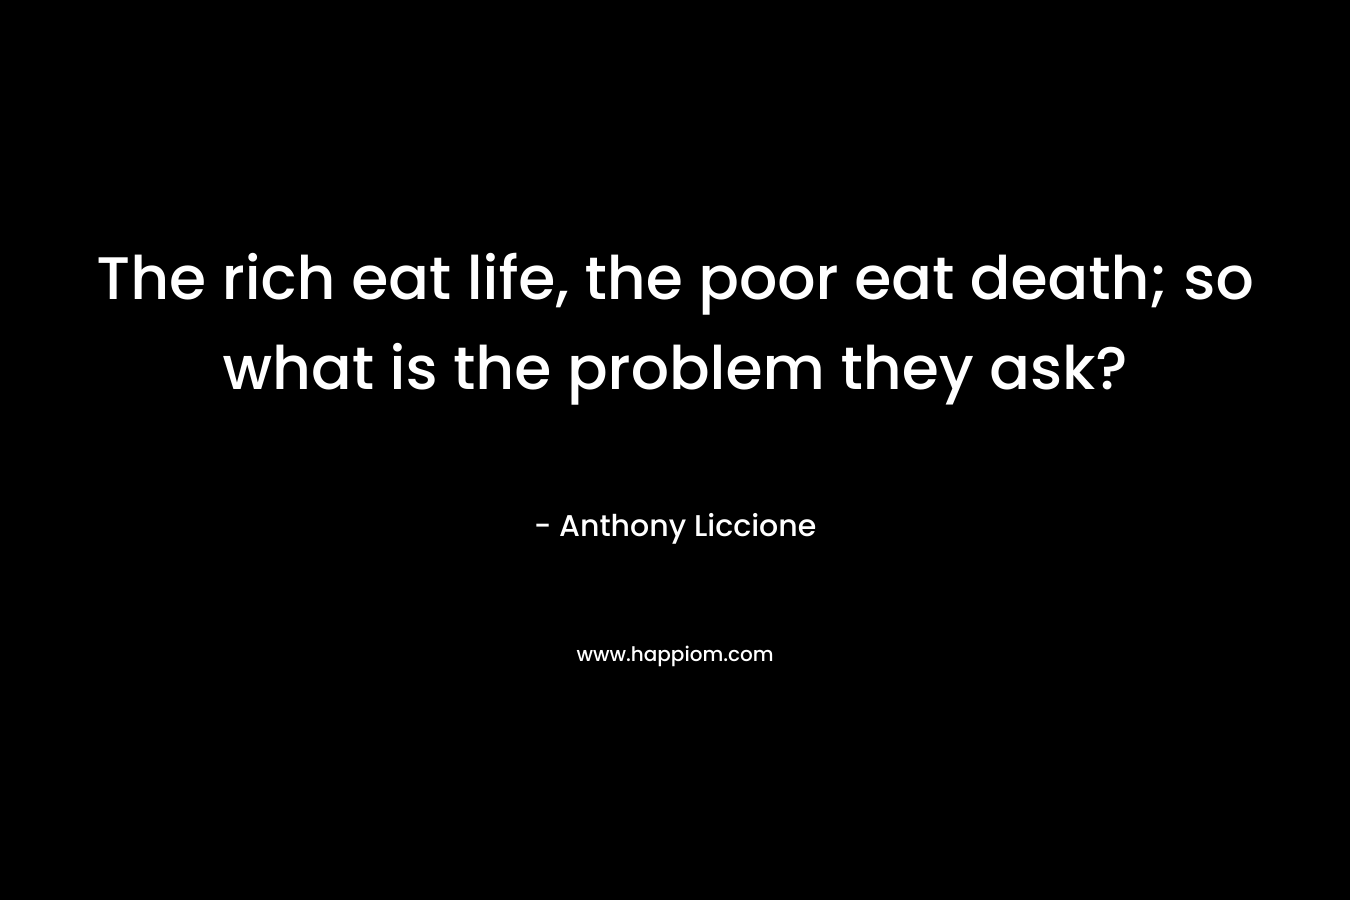 The rich eat life, the poor eat death; so what is the problem they ask?